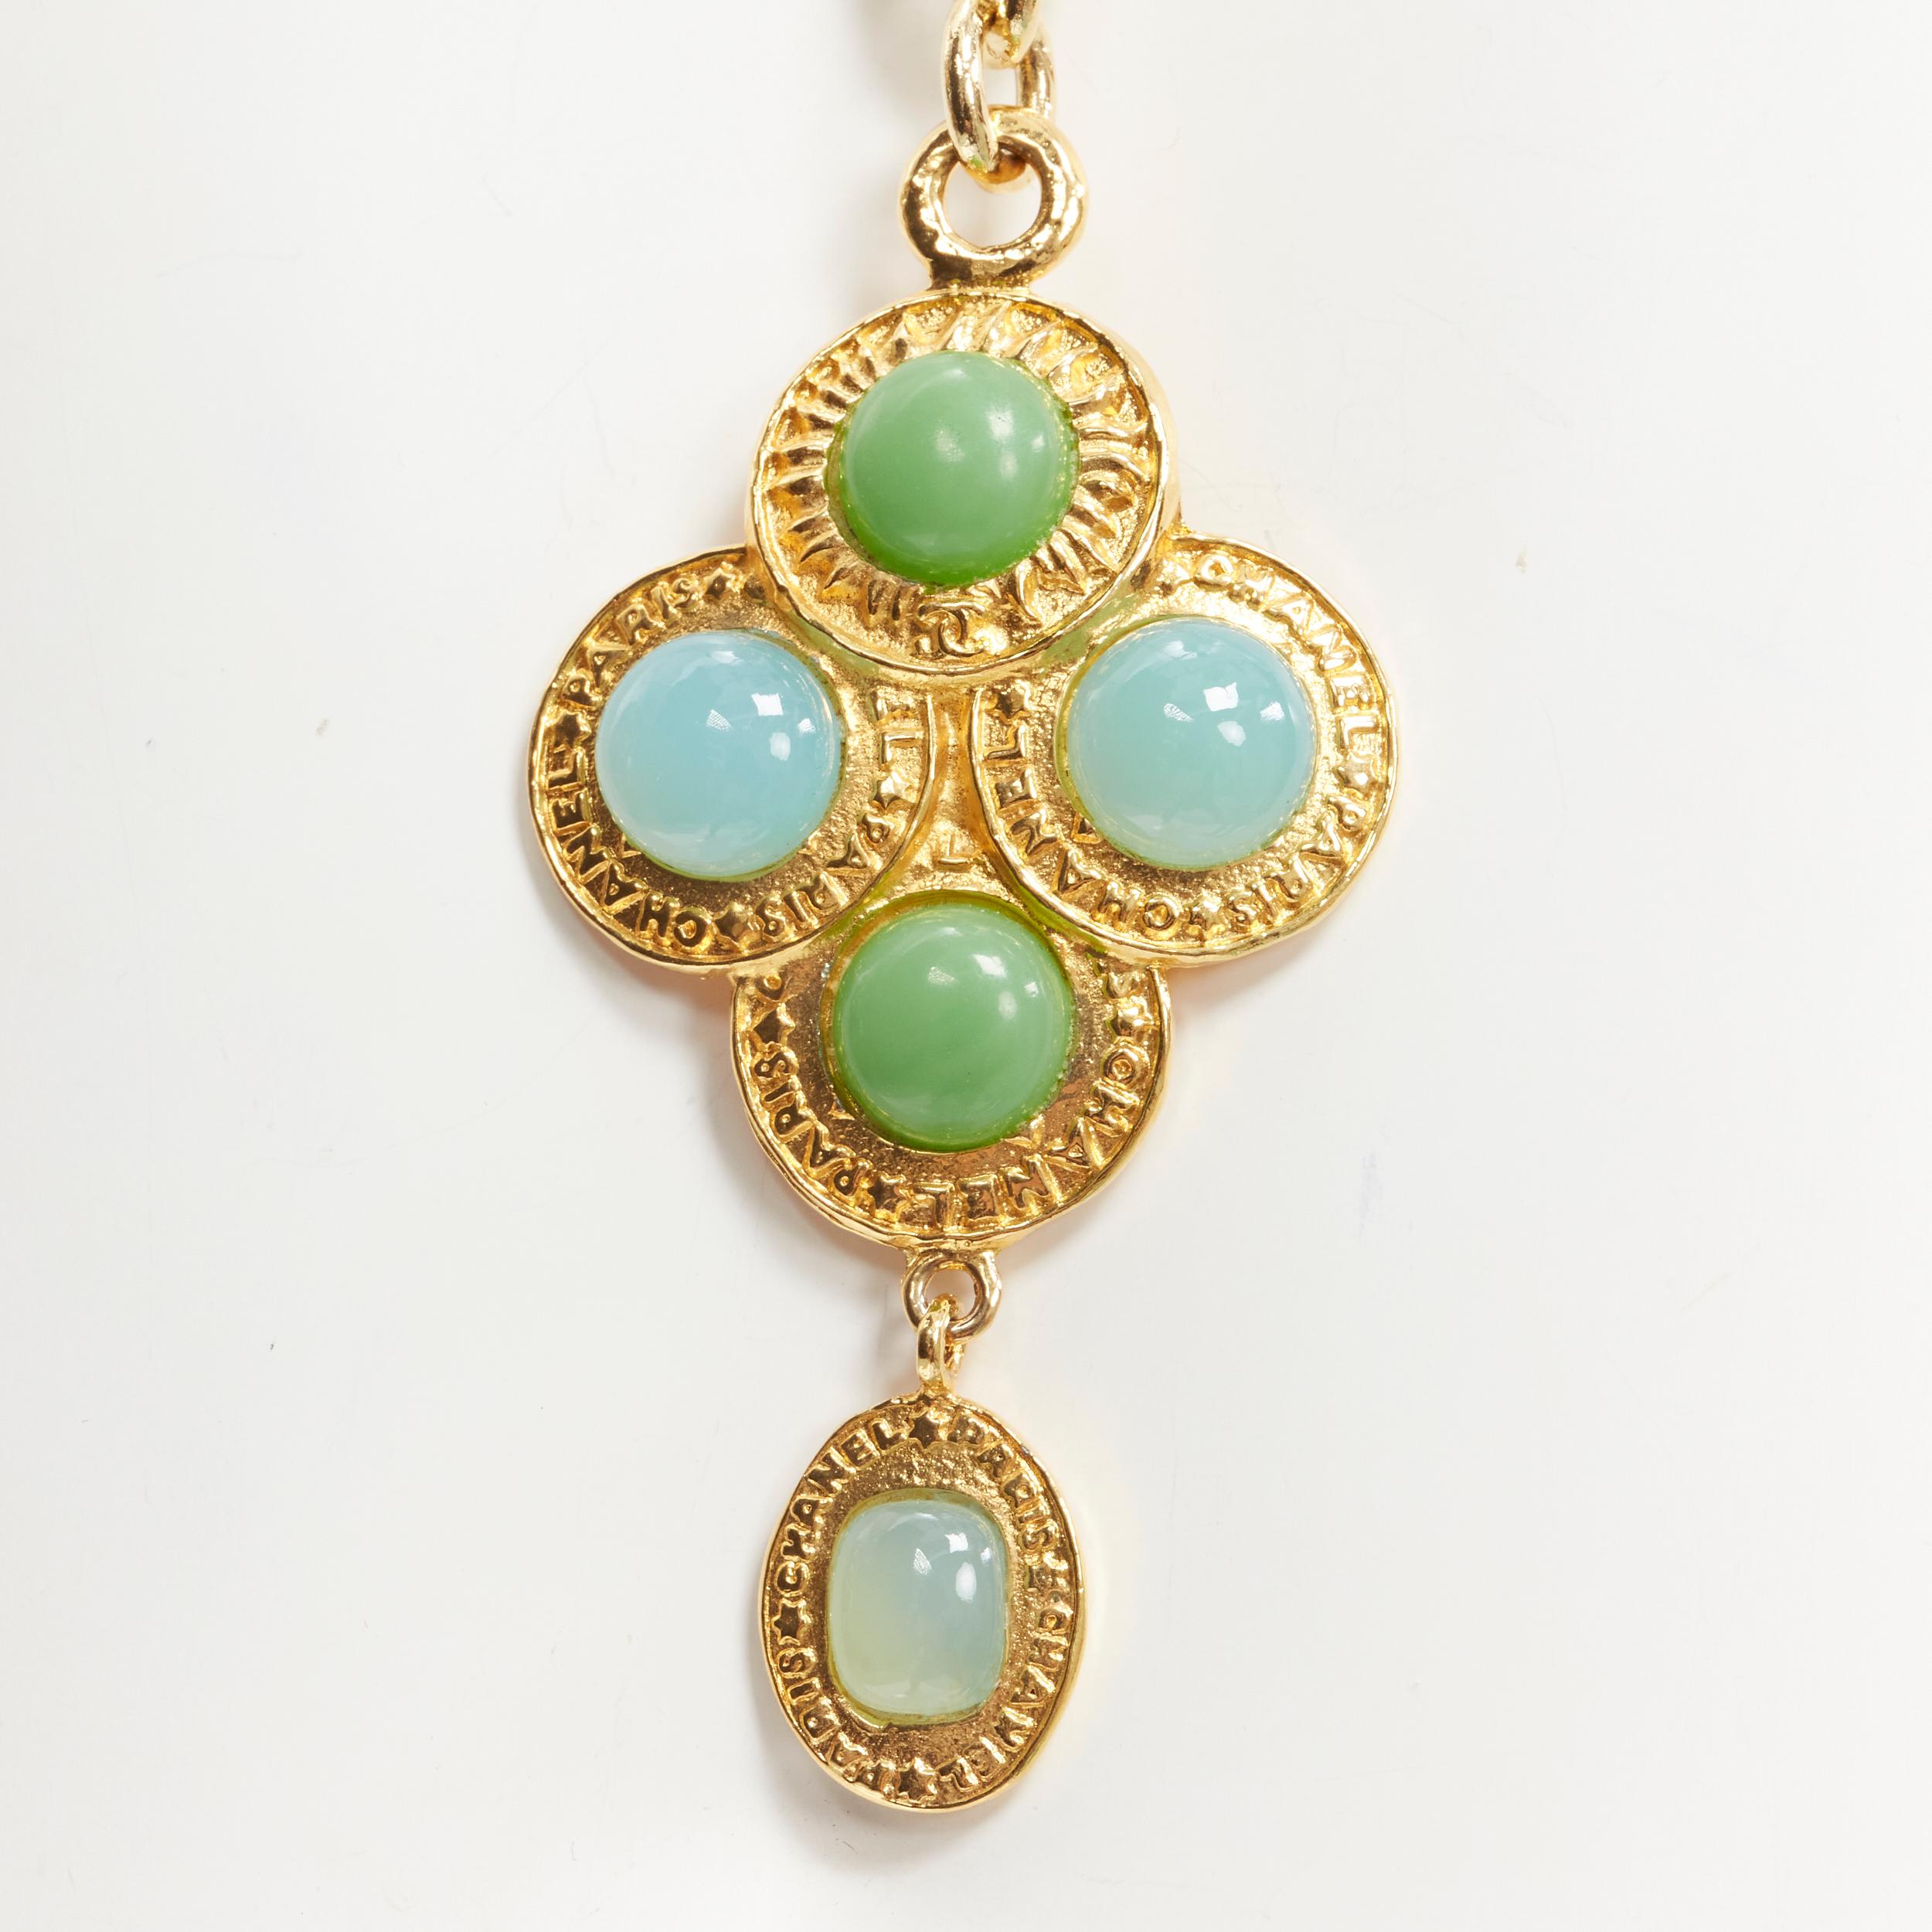 vintage CHANEL Collection 28 1991 jade turquoise green Gripoix pendent necklace
Brand: Chanel
Designer: Karl Lagerfeld
Collection: Collection 28 
Material: Metal
Color: Gold
Pattern: Solid
Closure: Clasp
Extra Detail: Gold-tone metal. Jade and